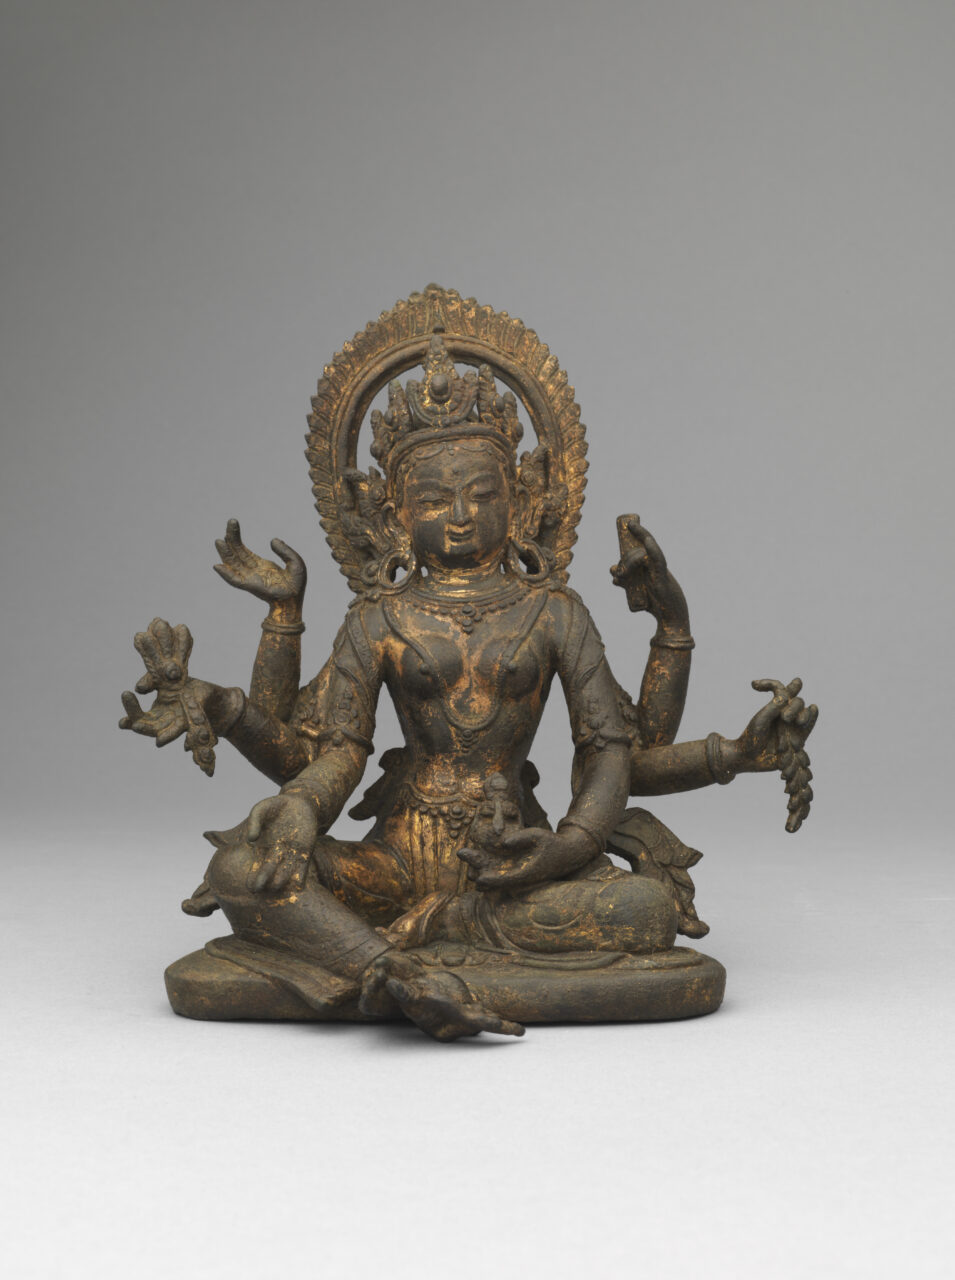 Tarnished copper-colored statue depicting six-armed goddess wearing pointed crown holding implements in each hand